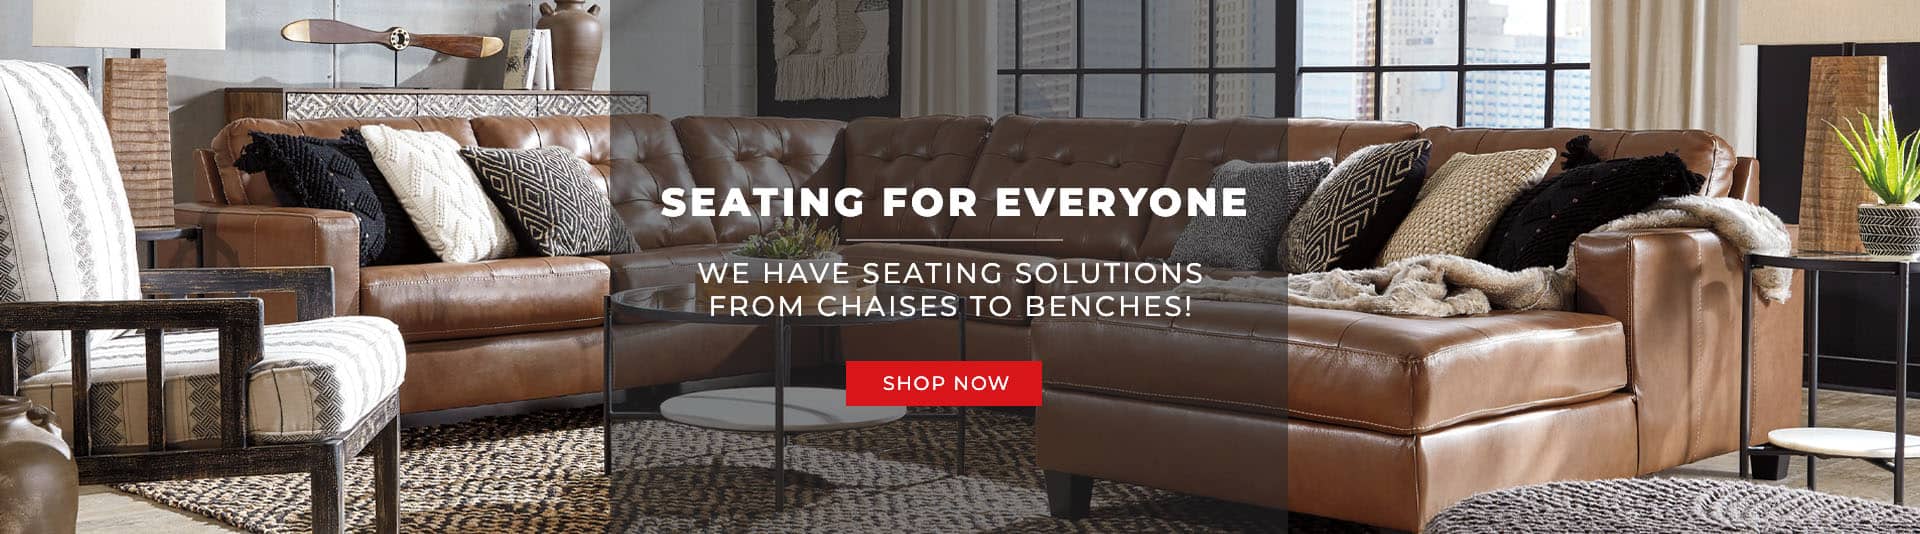 Seating for Everyone